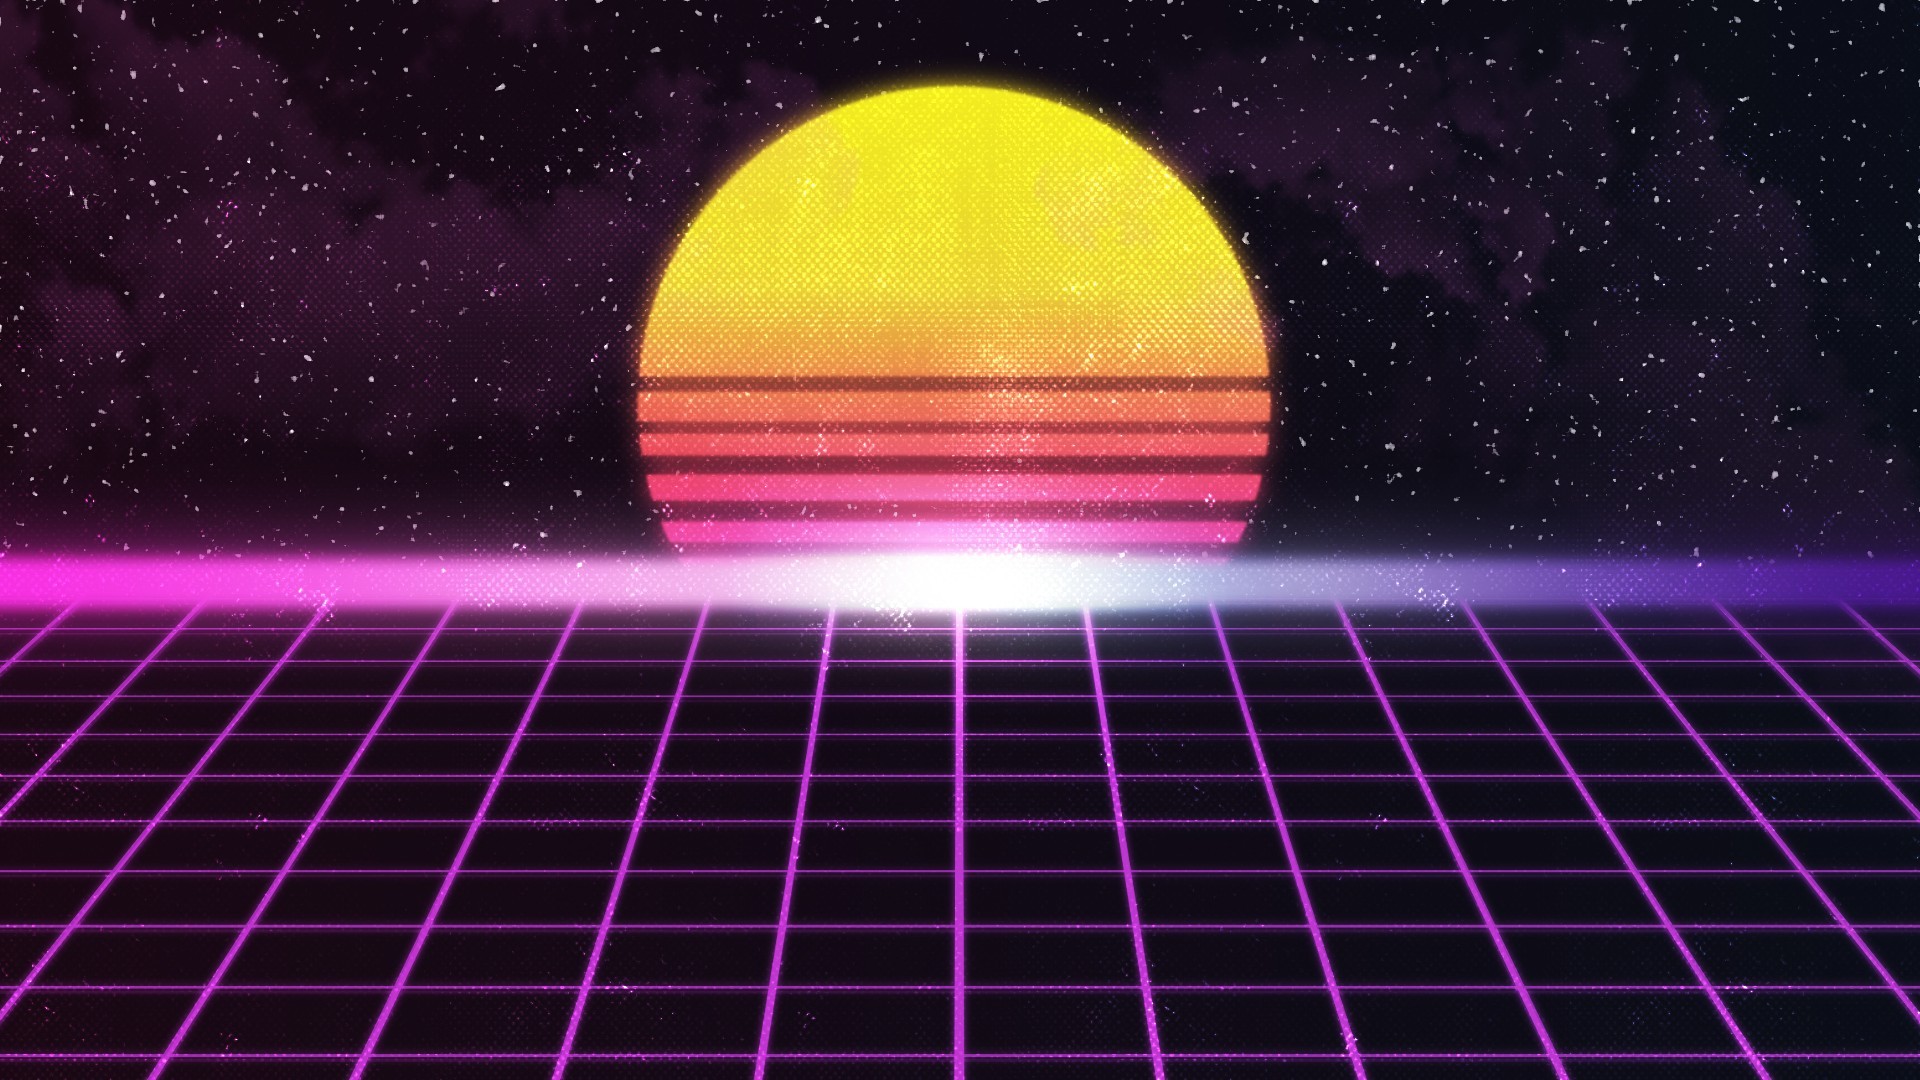 #80s wallpaper. #retrowave background. #synth. #synthwave. 